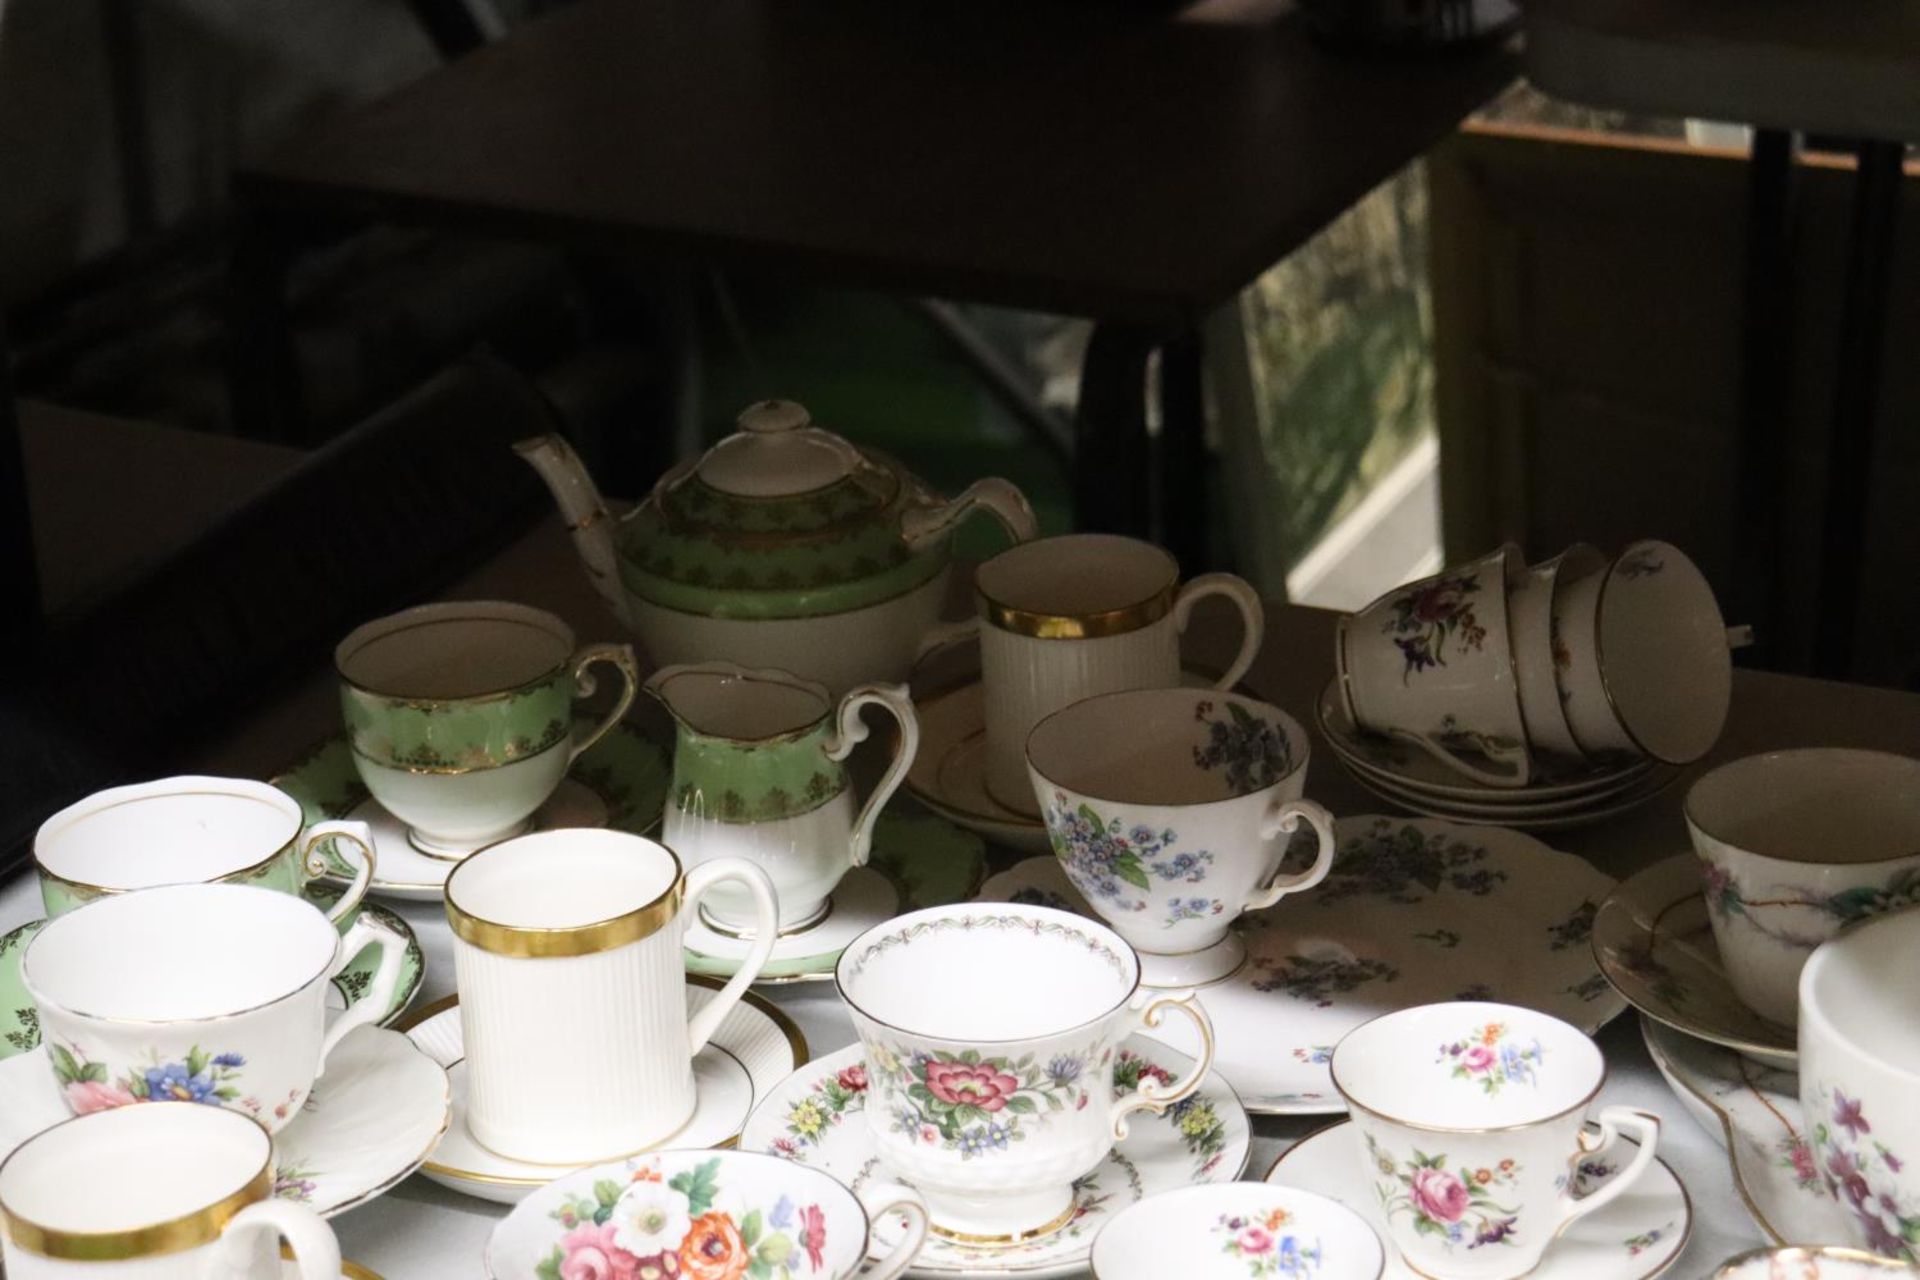 A LARGE QUANTITY OF VINTAGE CUPS, SAUCERS, PLATES, ETC TO INCLUDE ROYAL WORCESTER 'ABLA', CROWN - Image 5 of 5